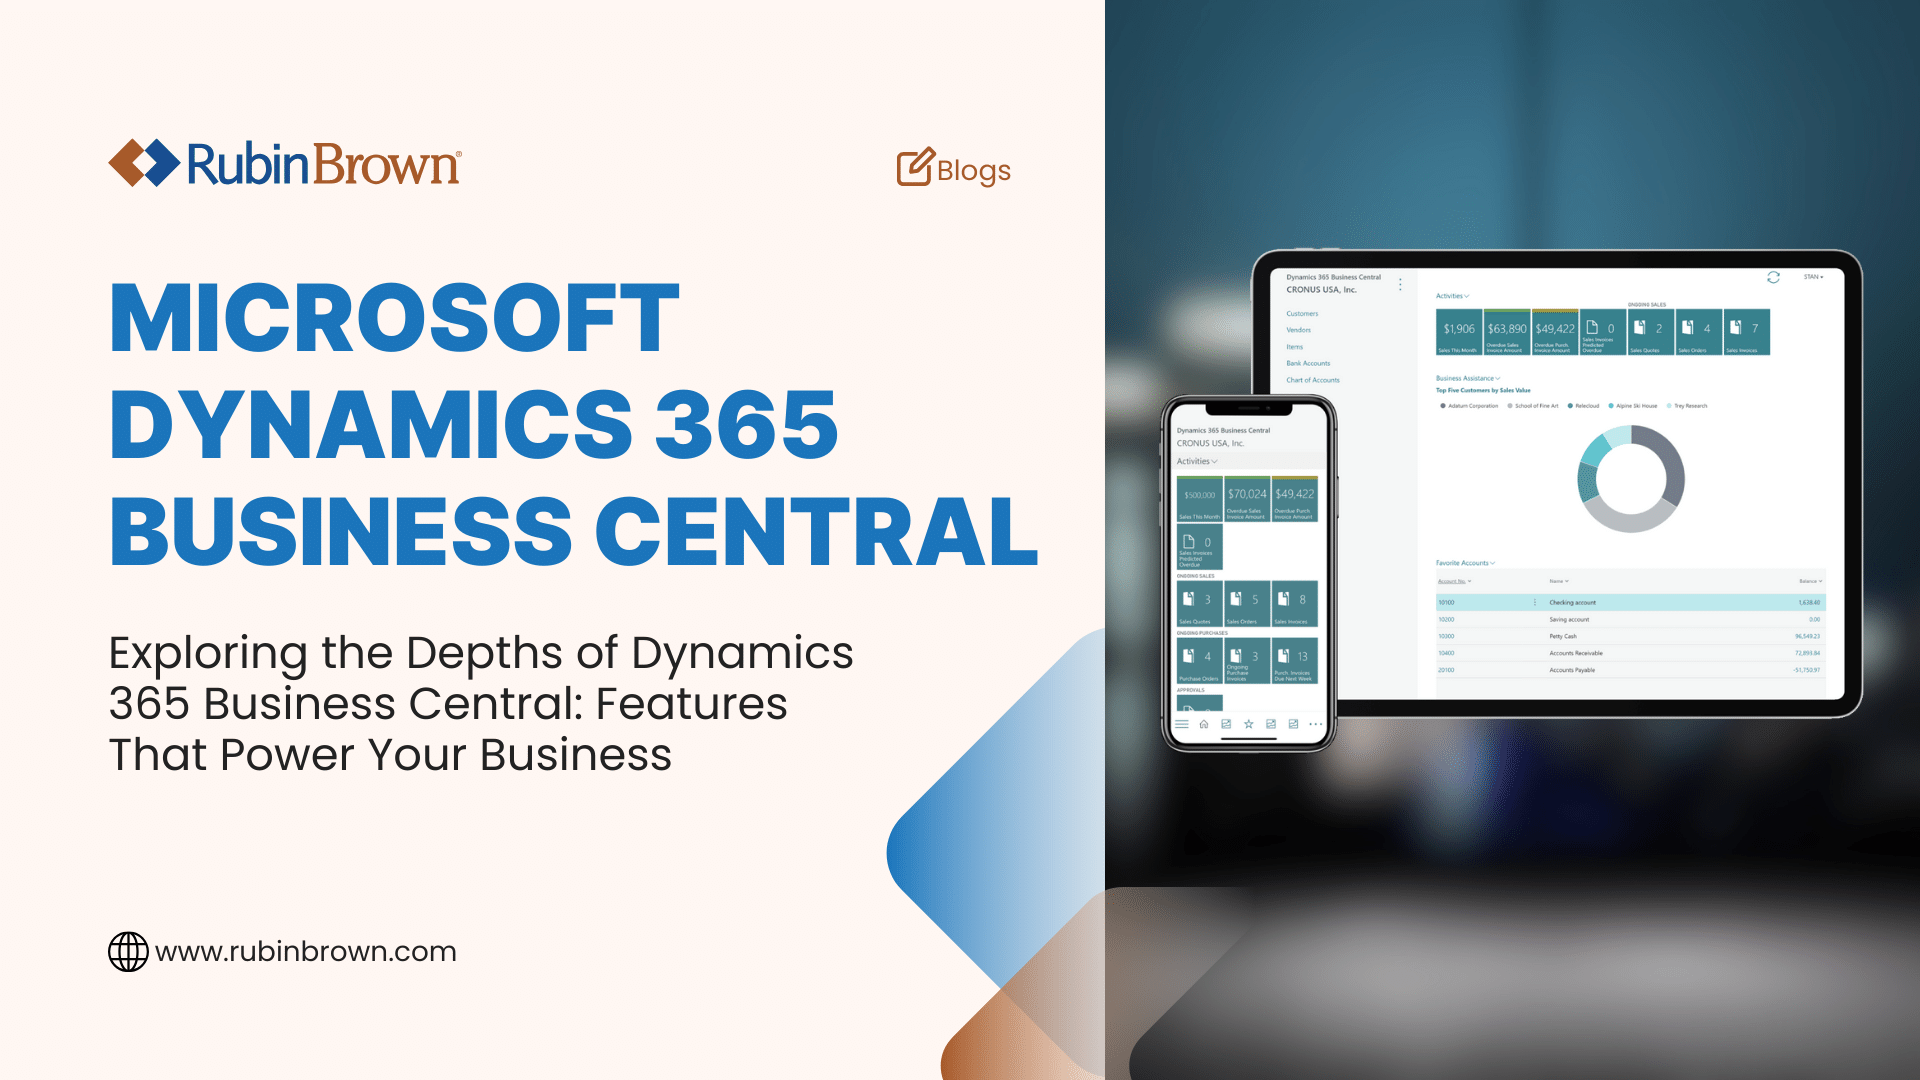 Microsoft Dynamics 365 Business Central Overview